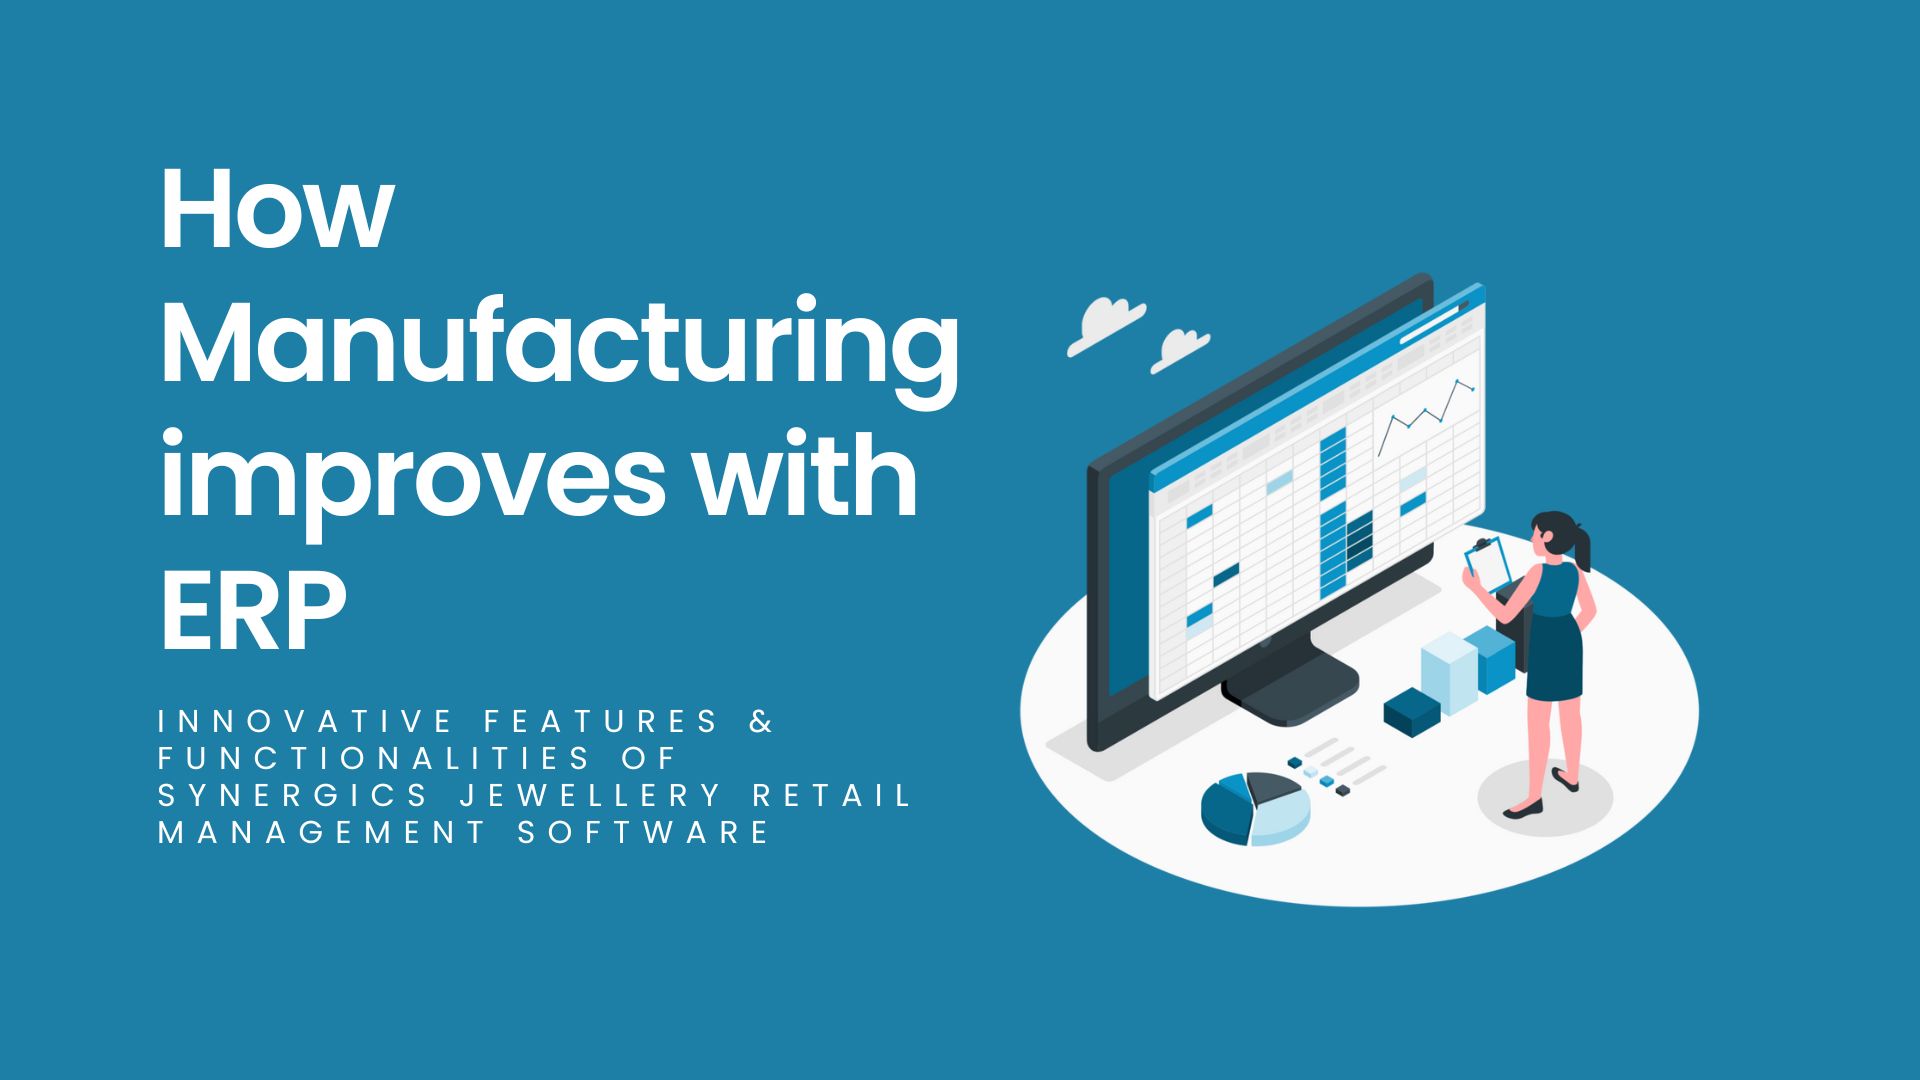 How Manufacturing improves with ERP